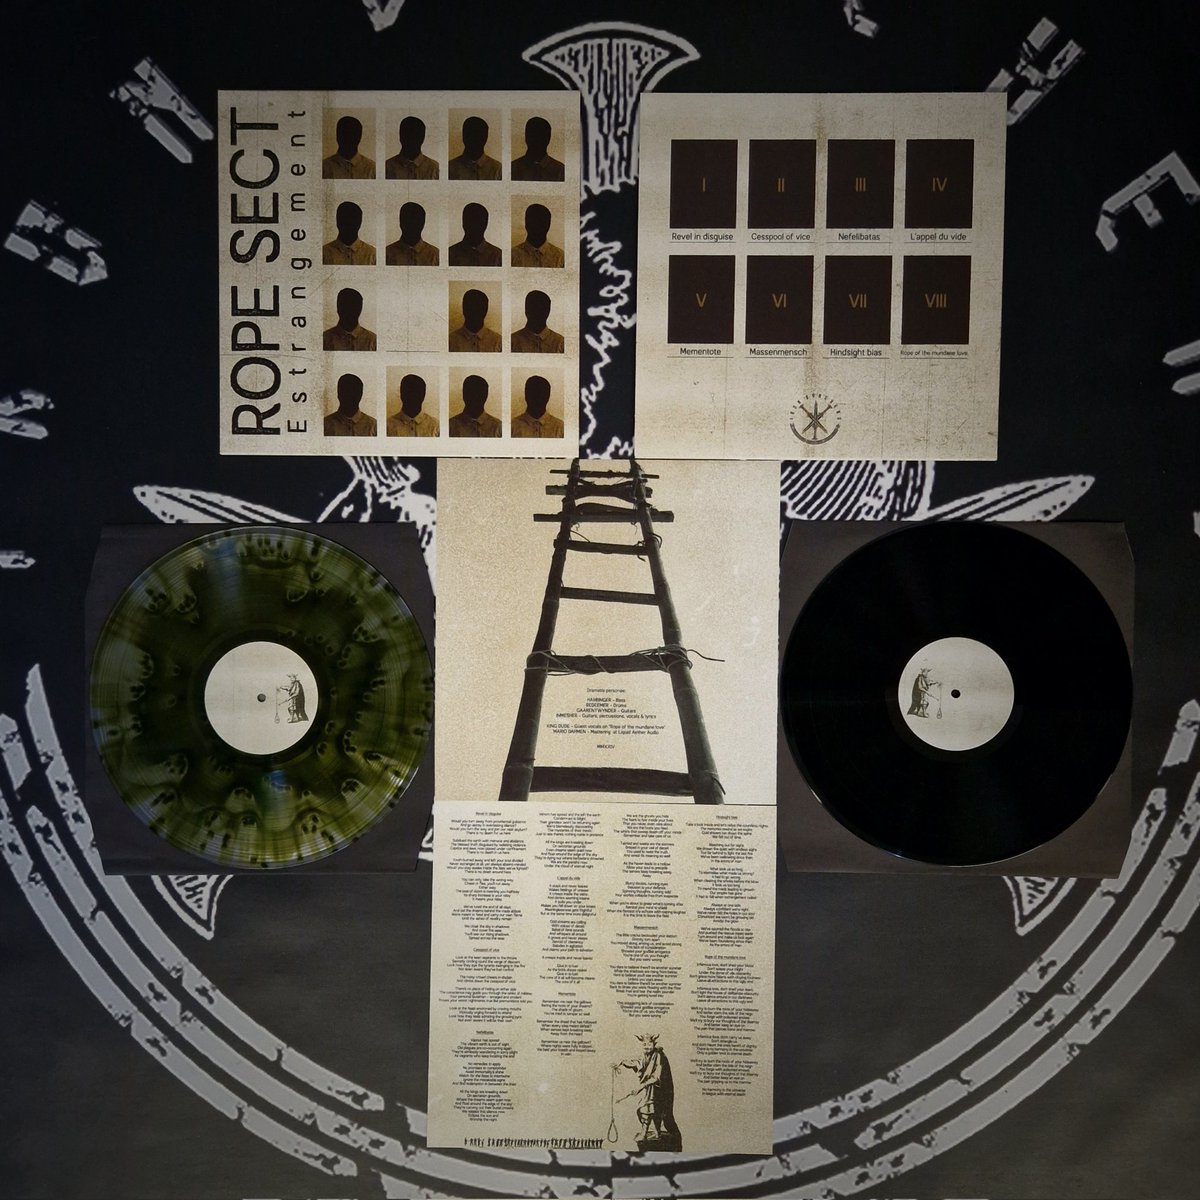 OUT NOW! ROPE SECT (Germany) 'Estrangement' LP/CD/Merch